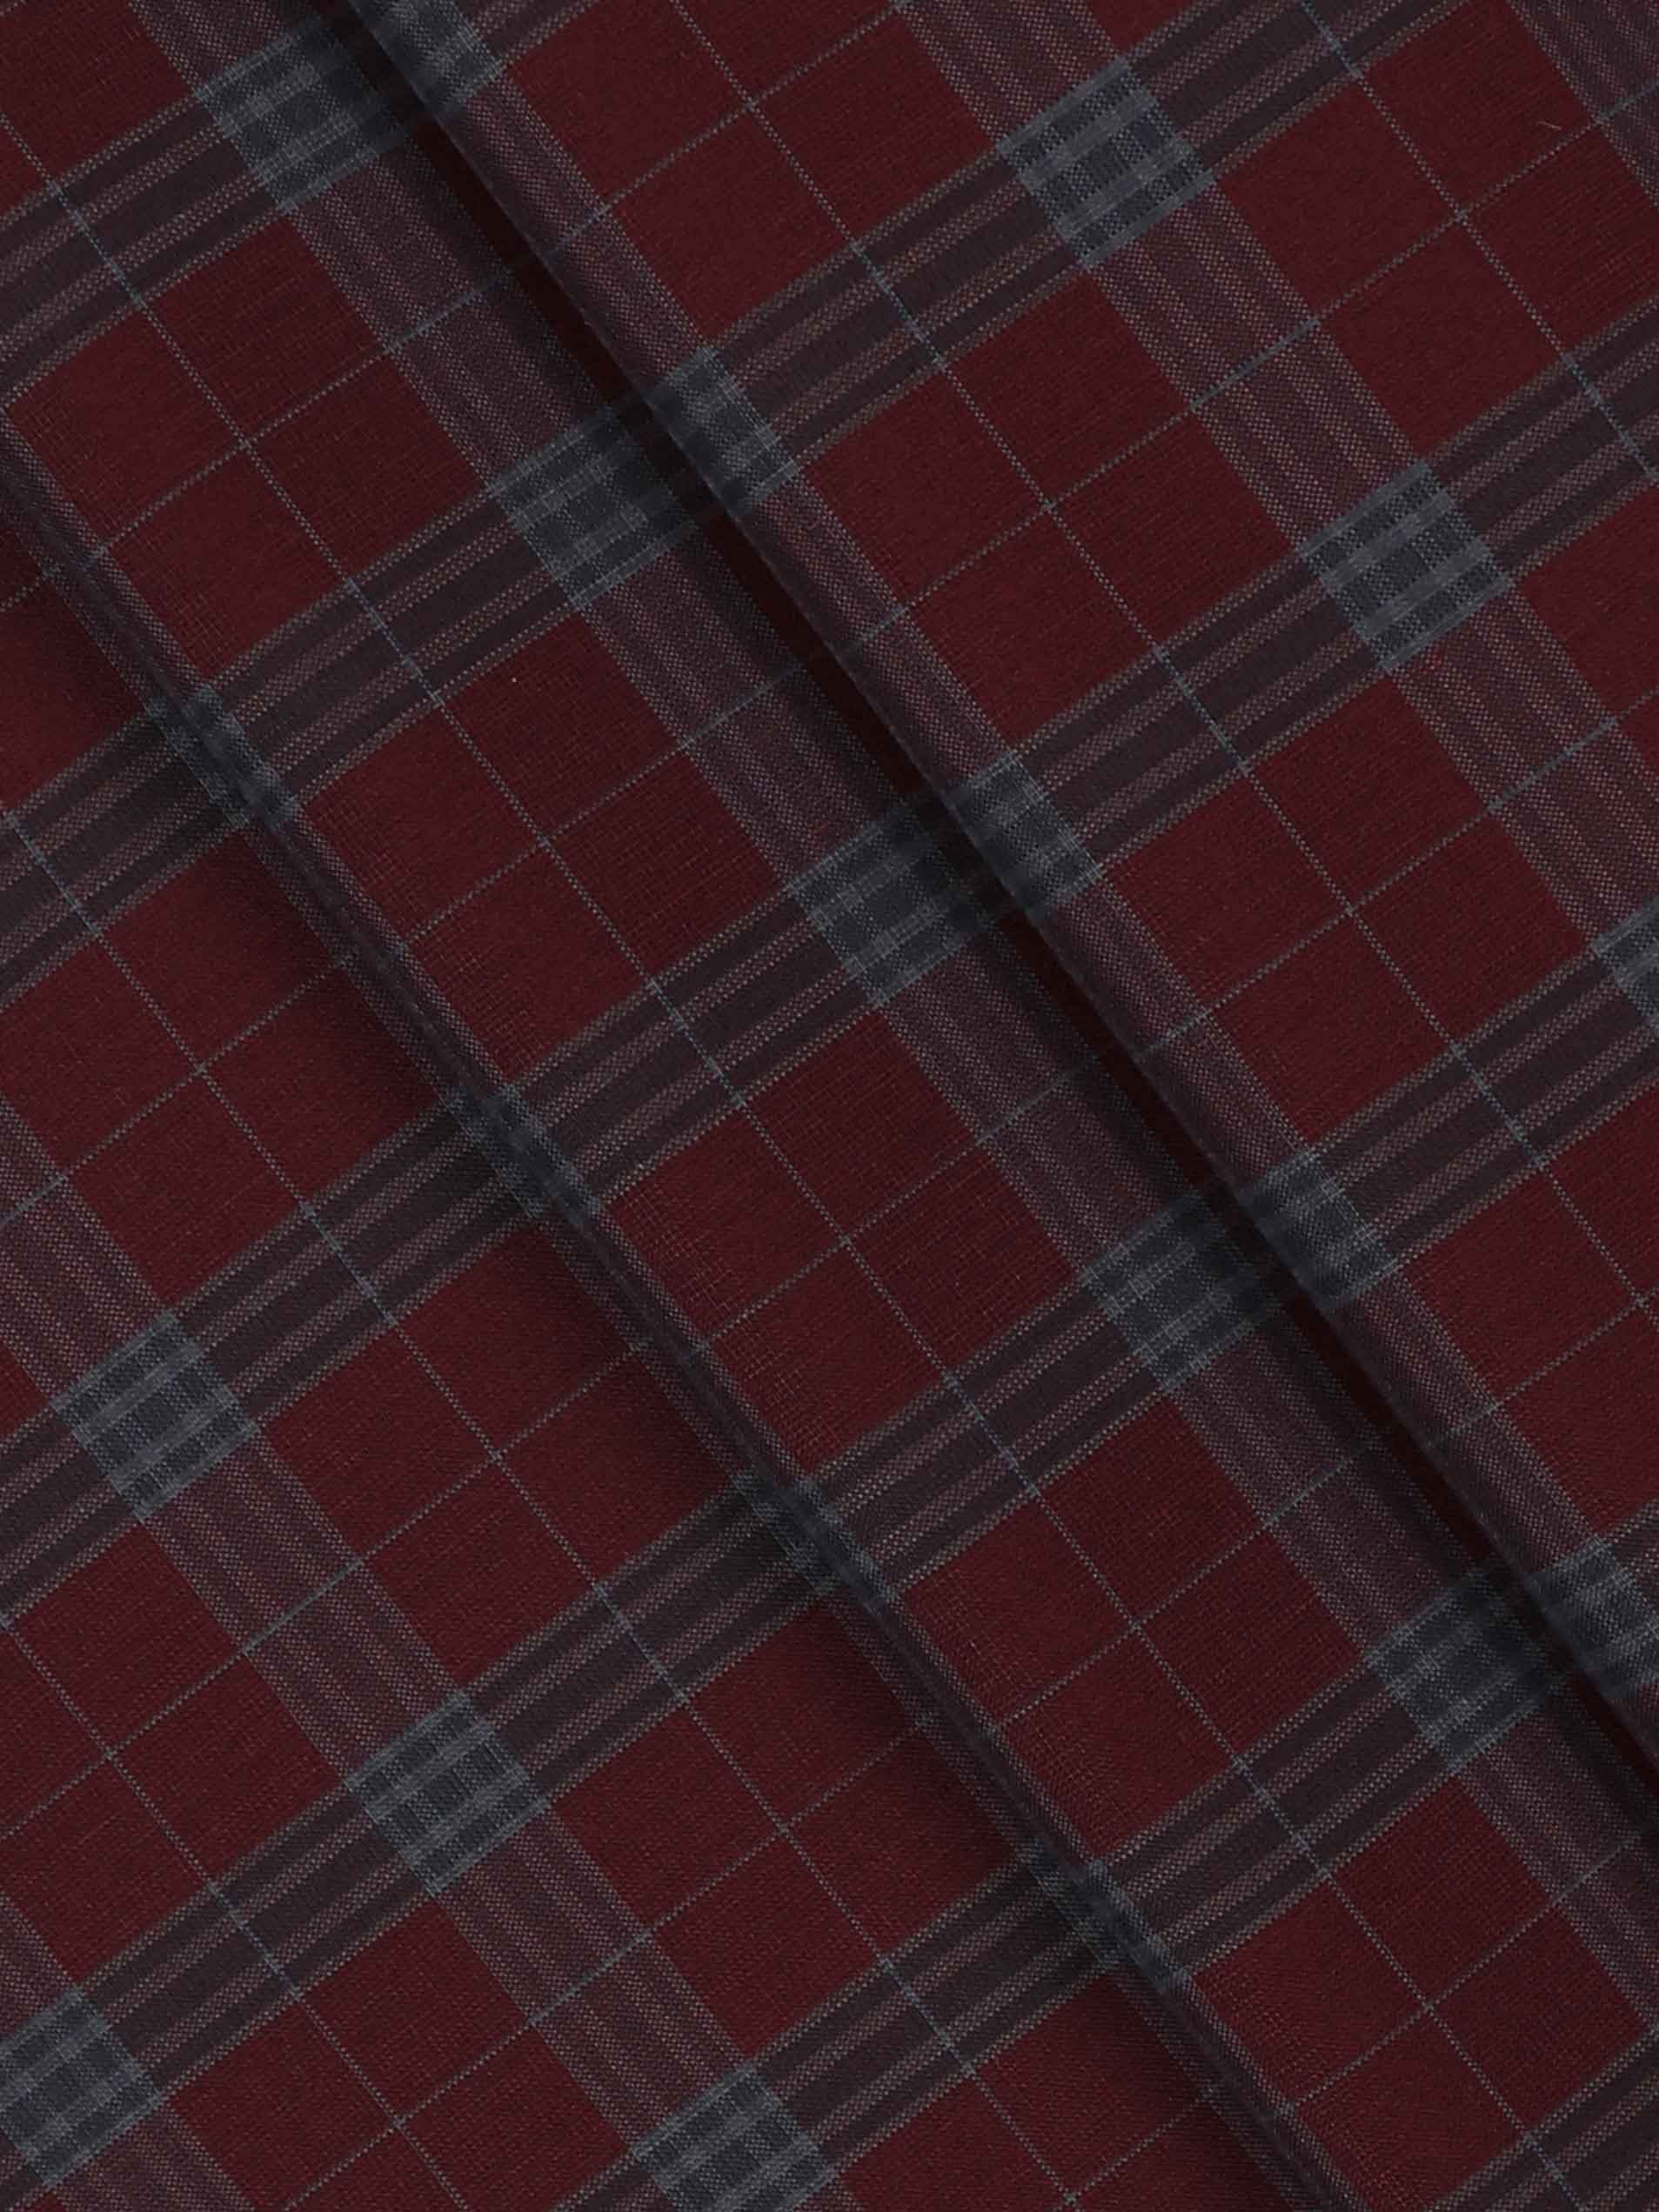 Cotton Maroon Check Shirt Fabric High Style